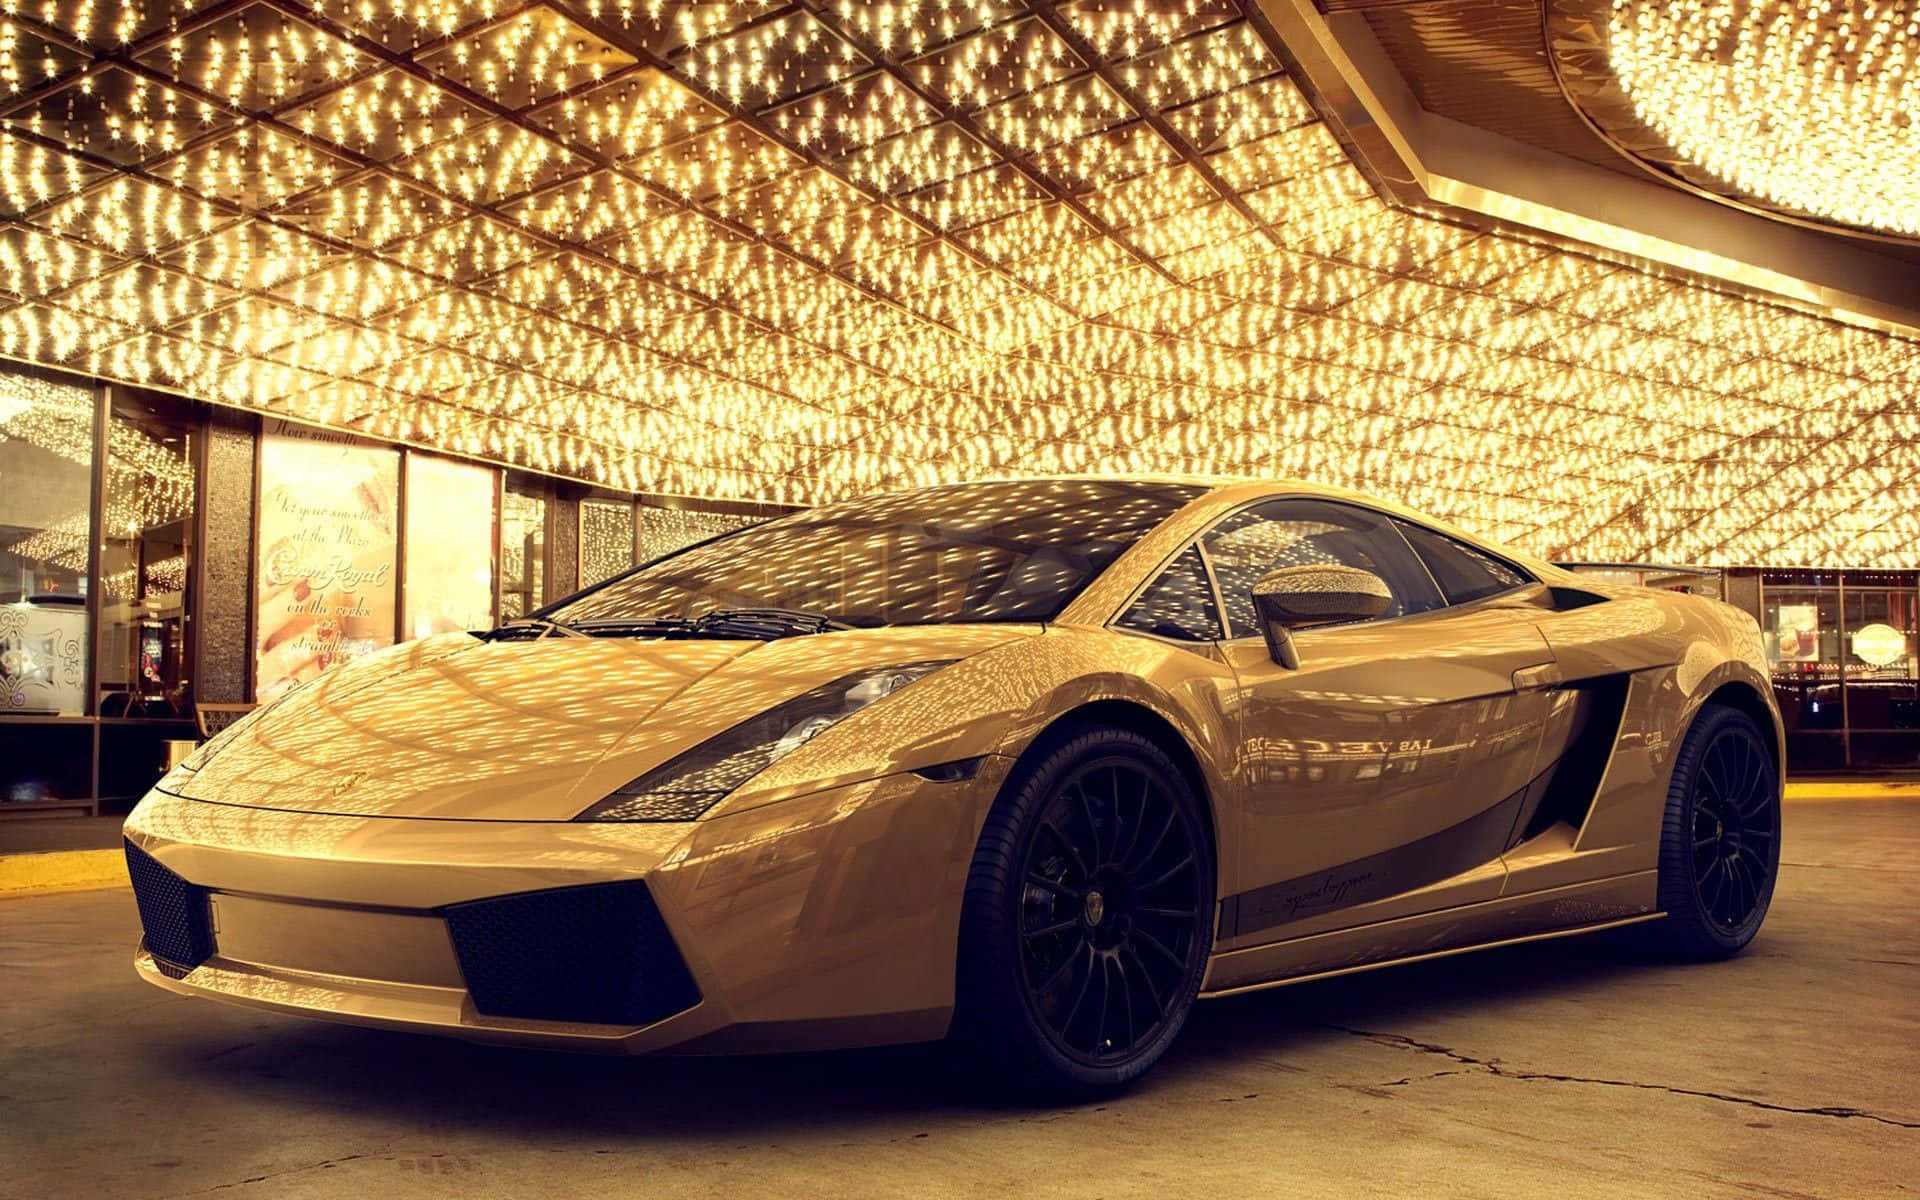 Experience a touch of luxury with this gold Lamborghini Wallpaper